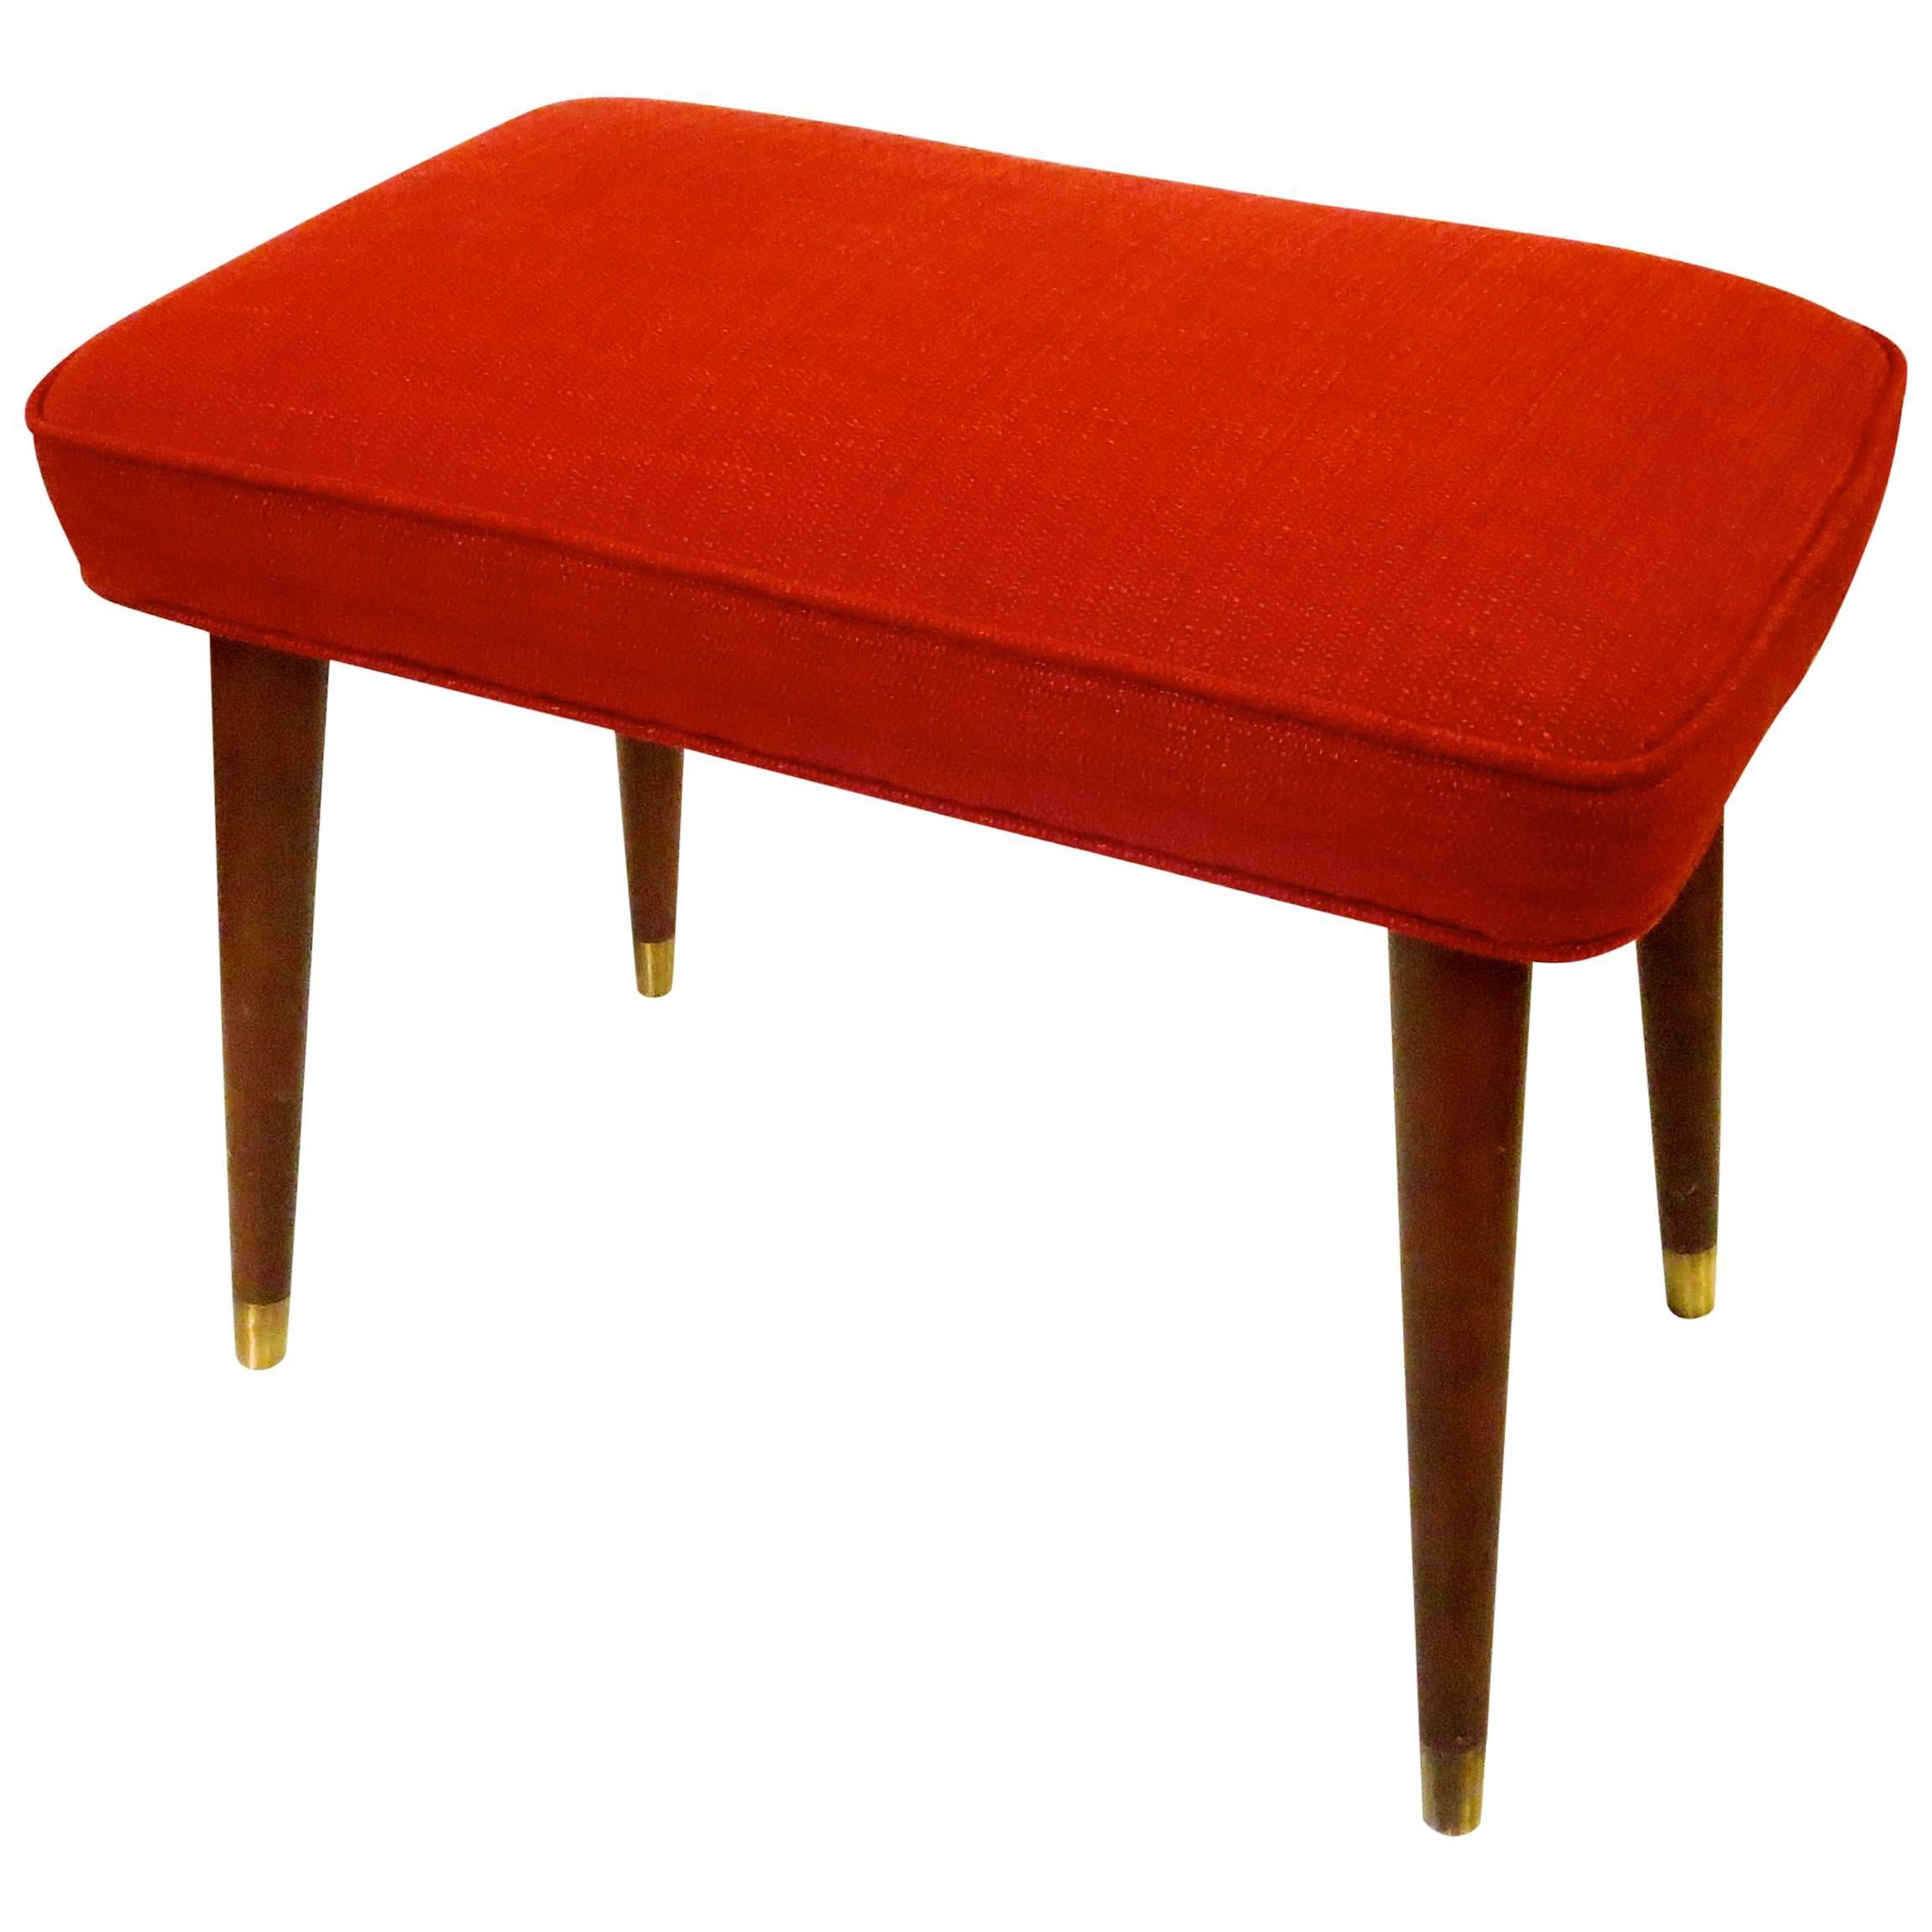 1950s Atomic Age American Modern Ottoman Footstool Upholstered in Red